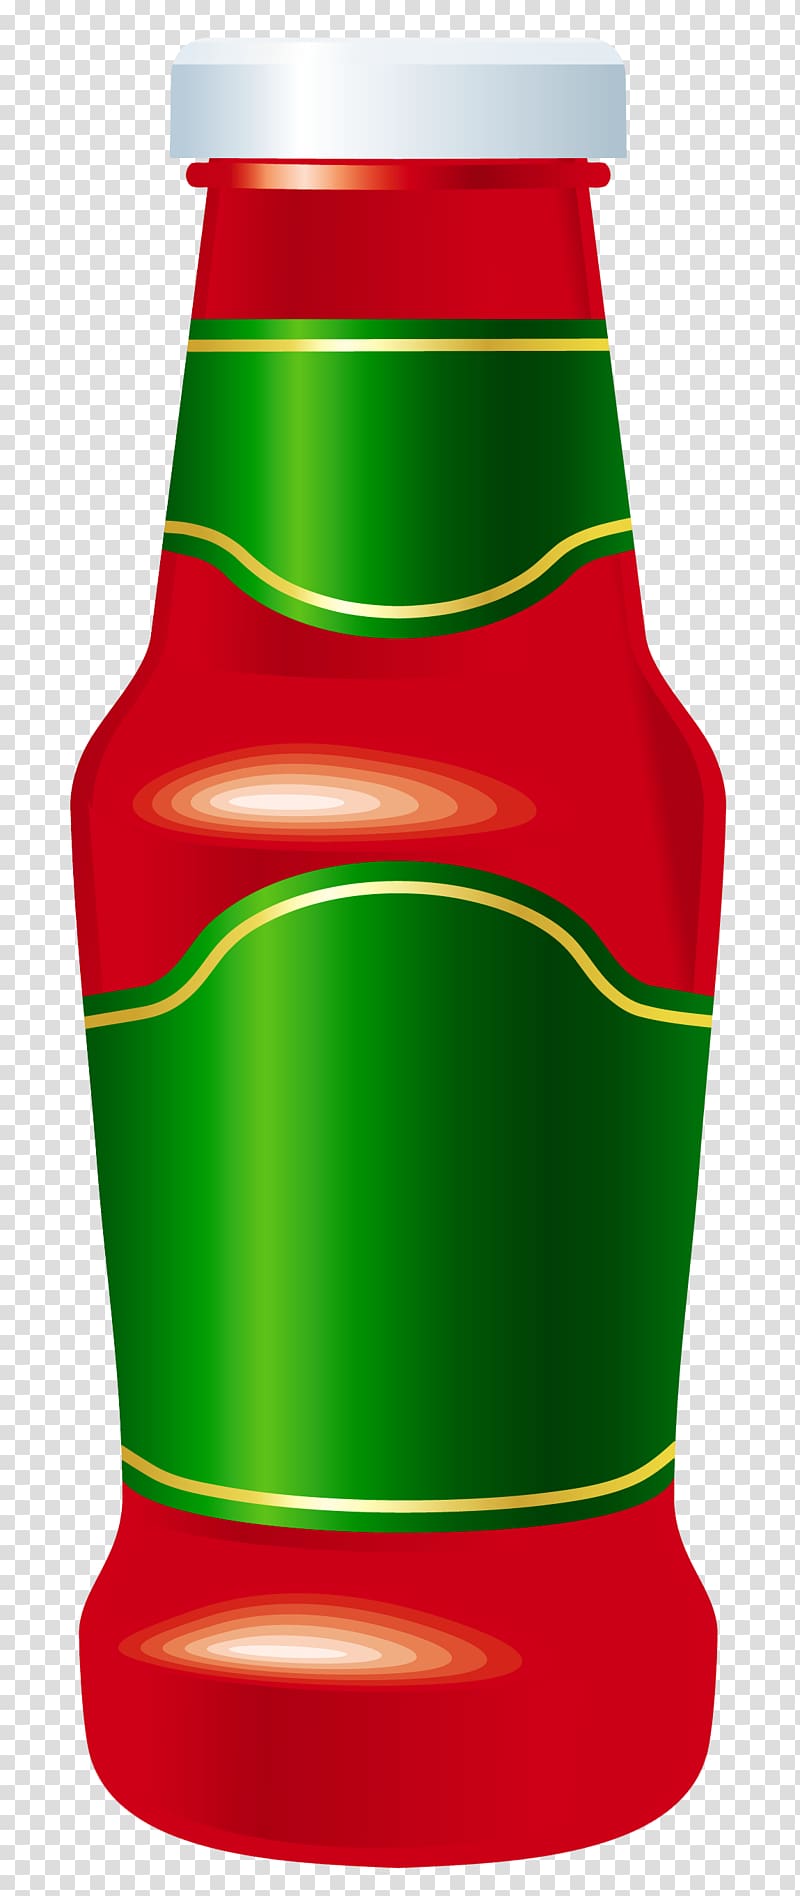 green and red bottle illustration, Brooks Catsup Bottle Water Tower Hot dog Hamburger Ketchup , Ketchup Bottle transparent background PNG clipart